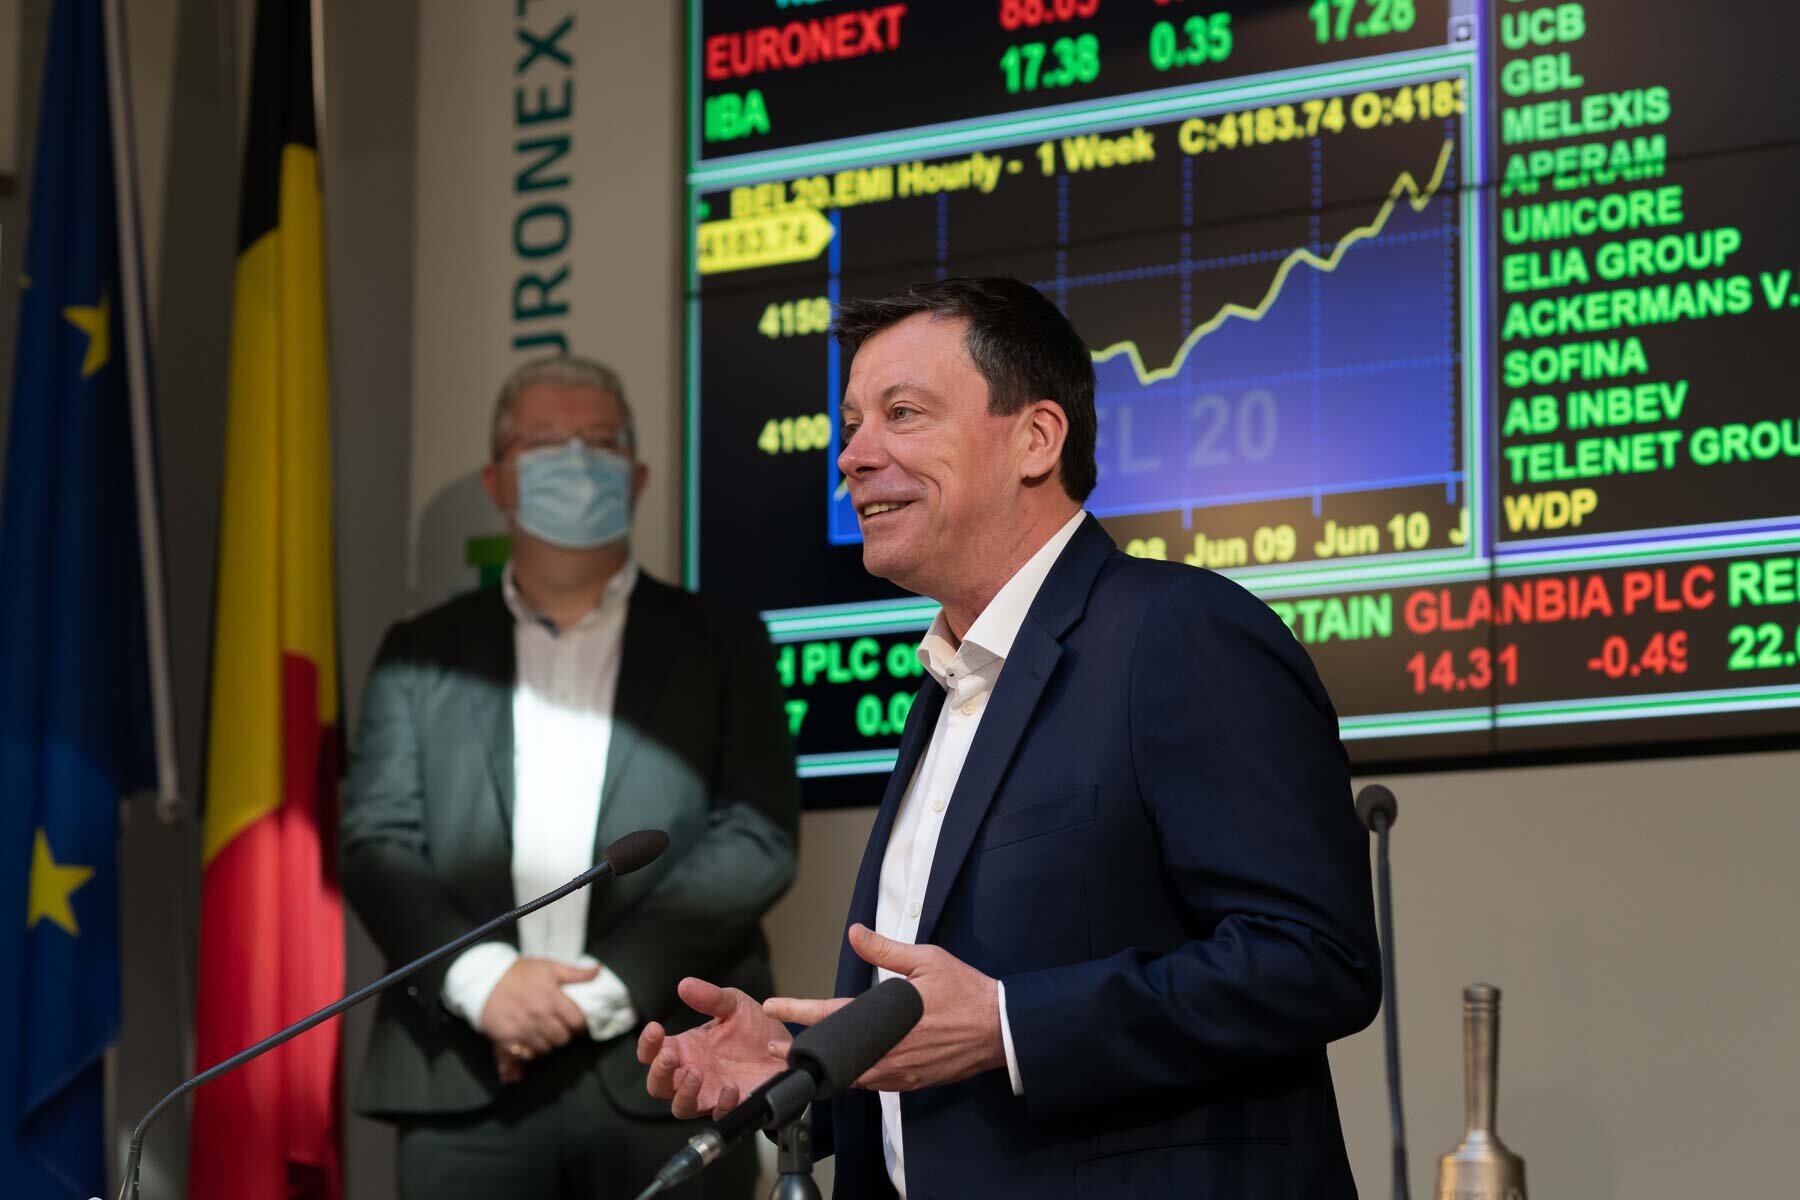  Frédéric Daerden speaking at the opening bell ceremony to mark the launch of the Social Bond of the Fédération Wallonie-Bruxelles (FWB) on the EURONEXT stock exchange in Brussels, 11 June 2021. 